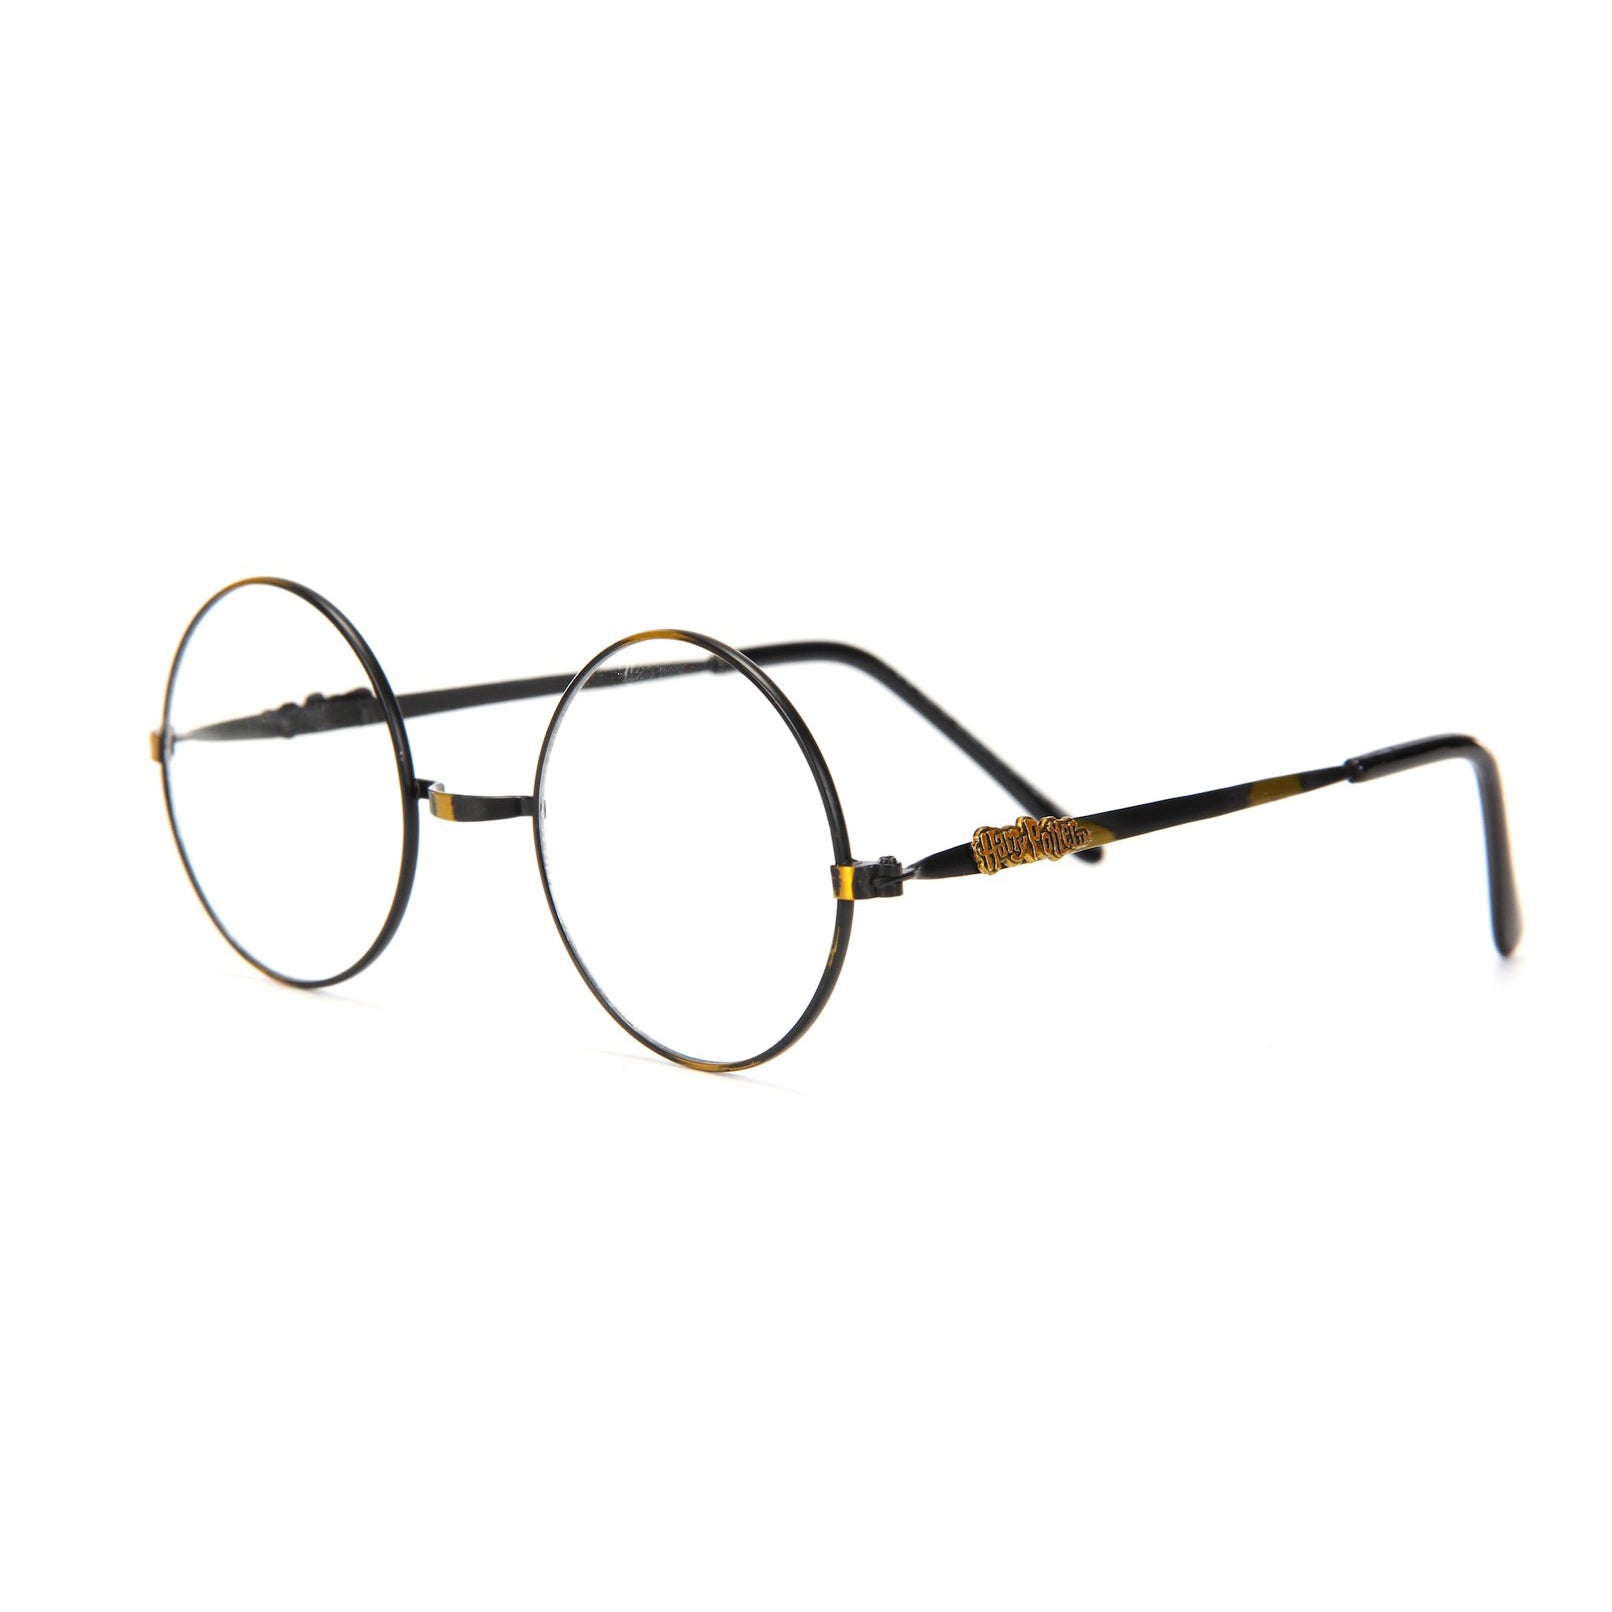 Harry Potter Glasses by The Noble Collection